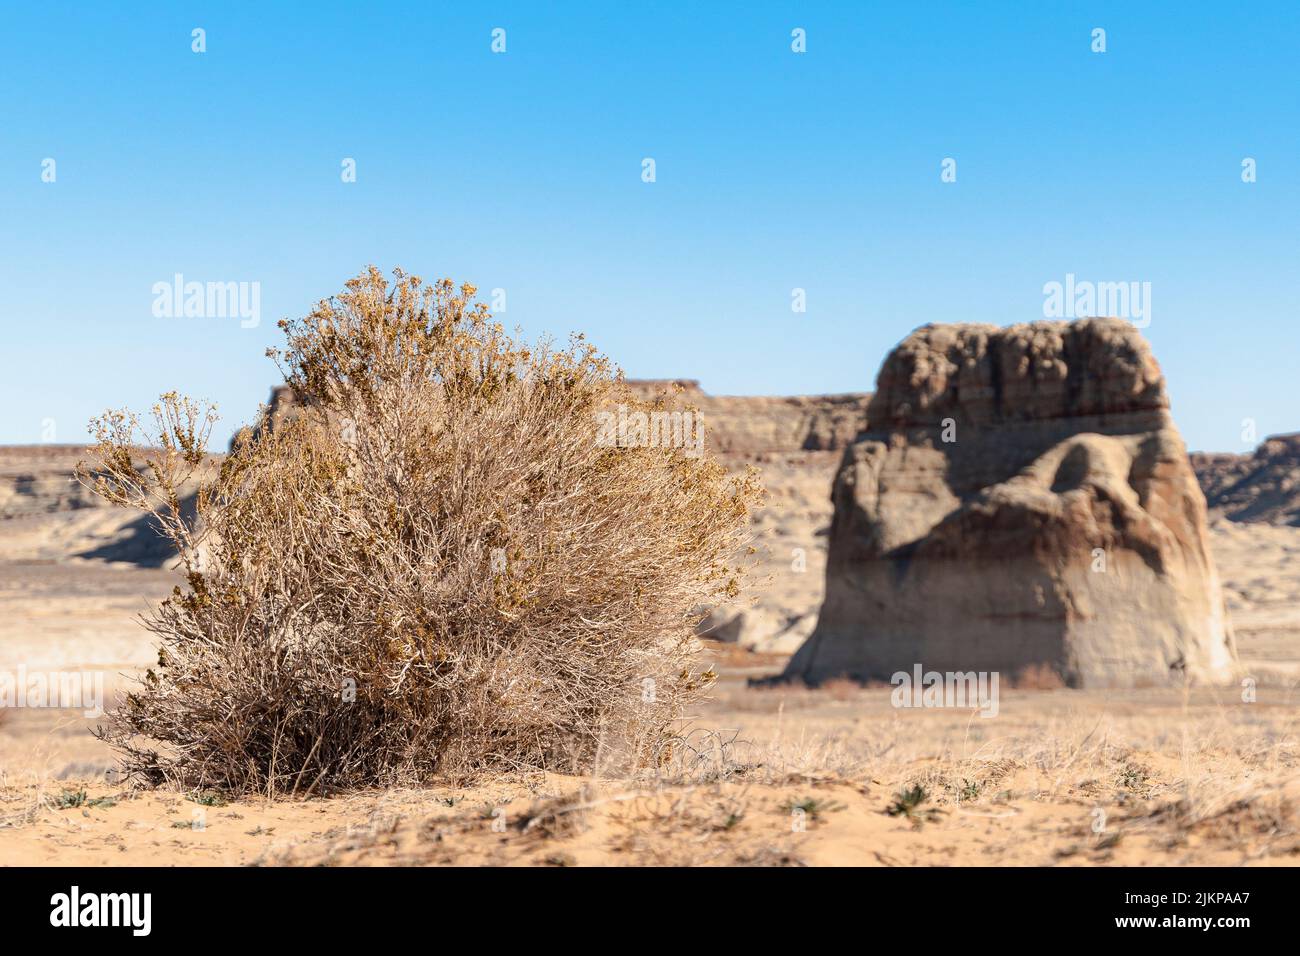 The Haloxylon ammodendron plant next to a rock formation in a desert Stock Photo